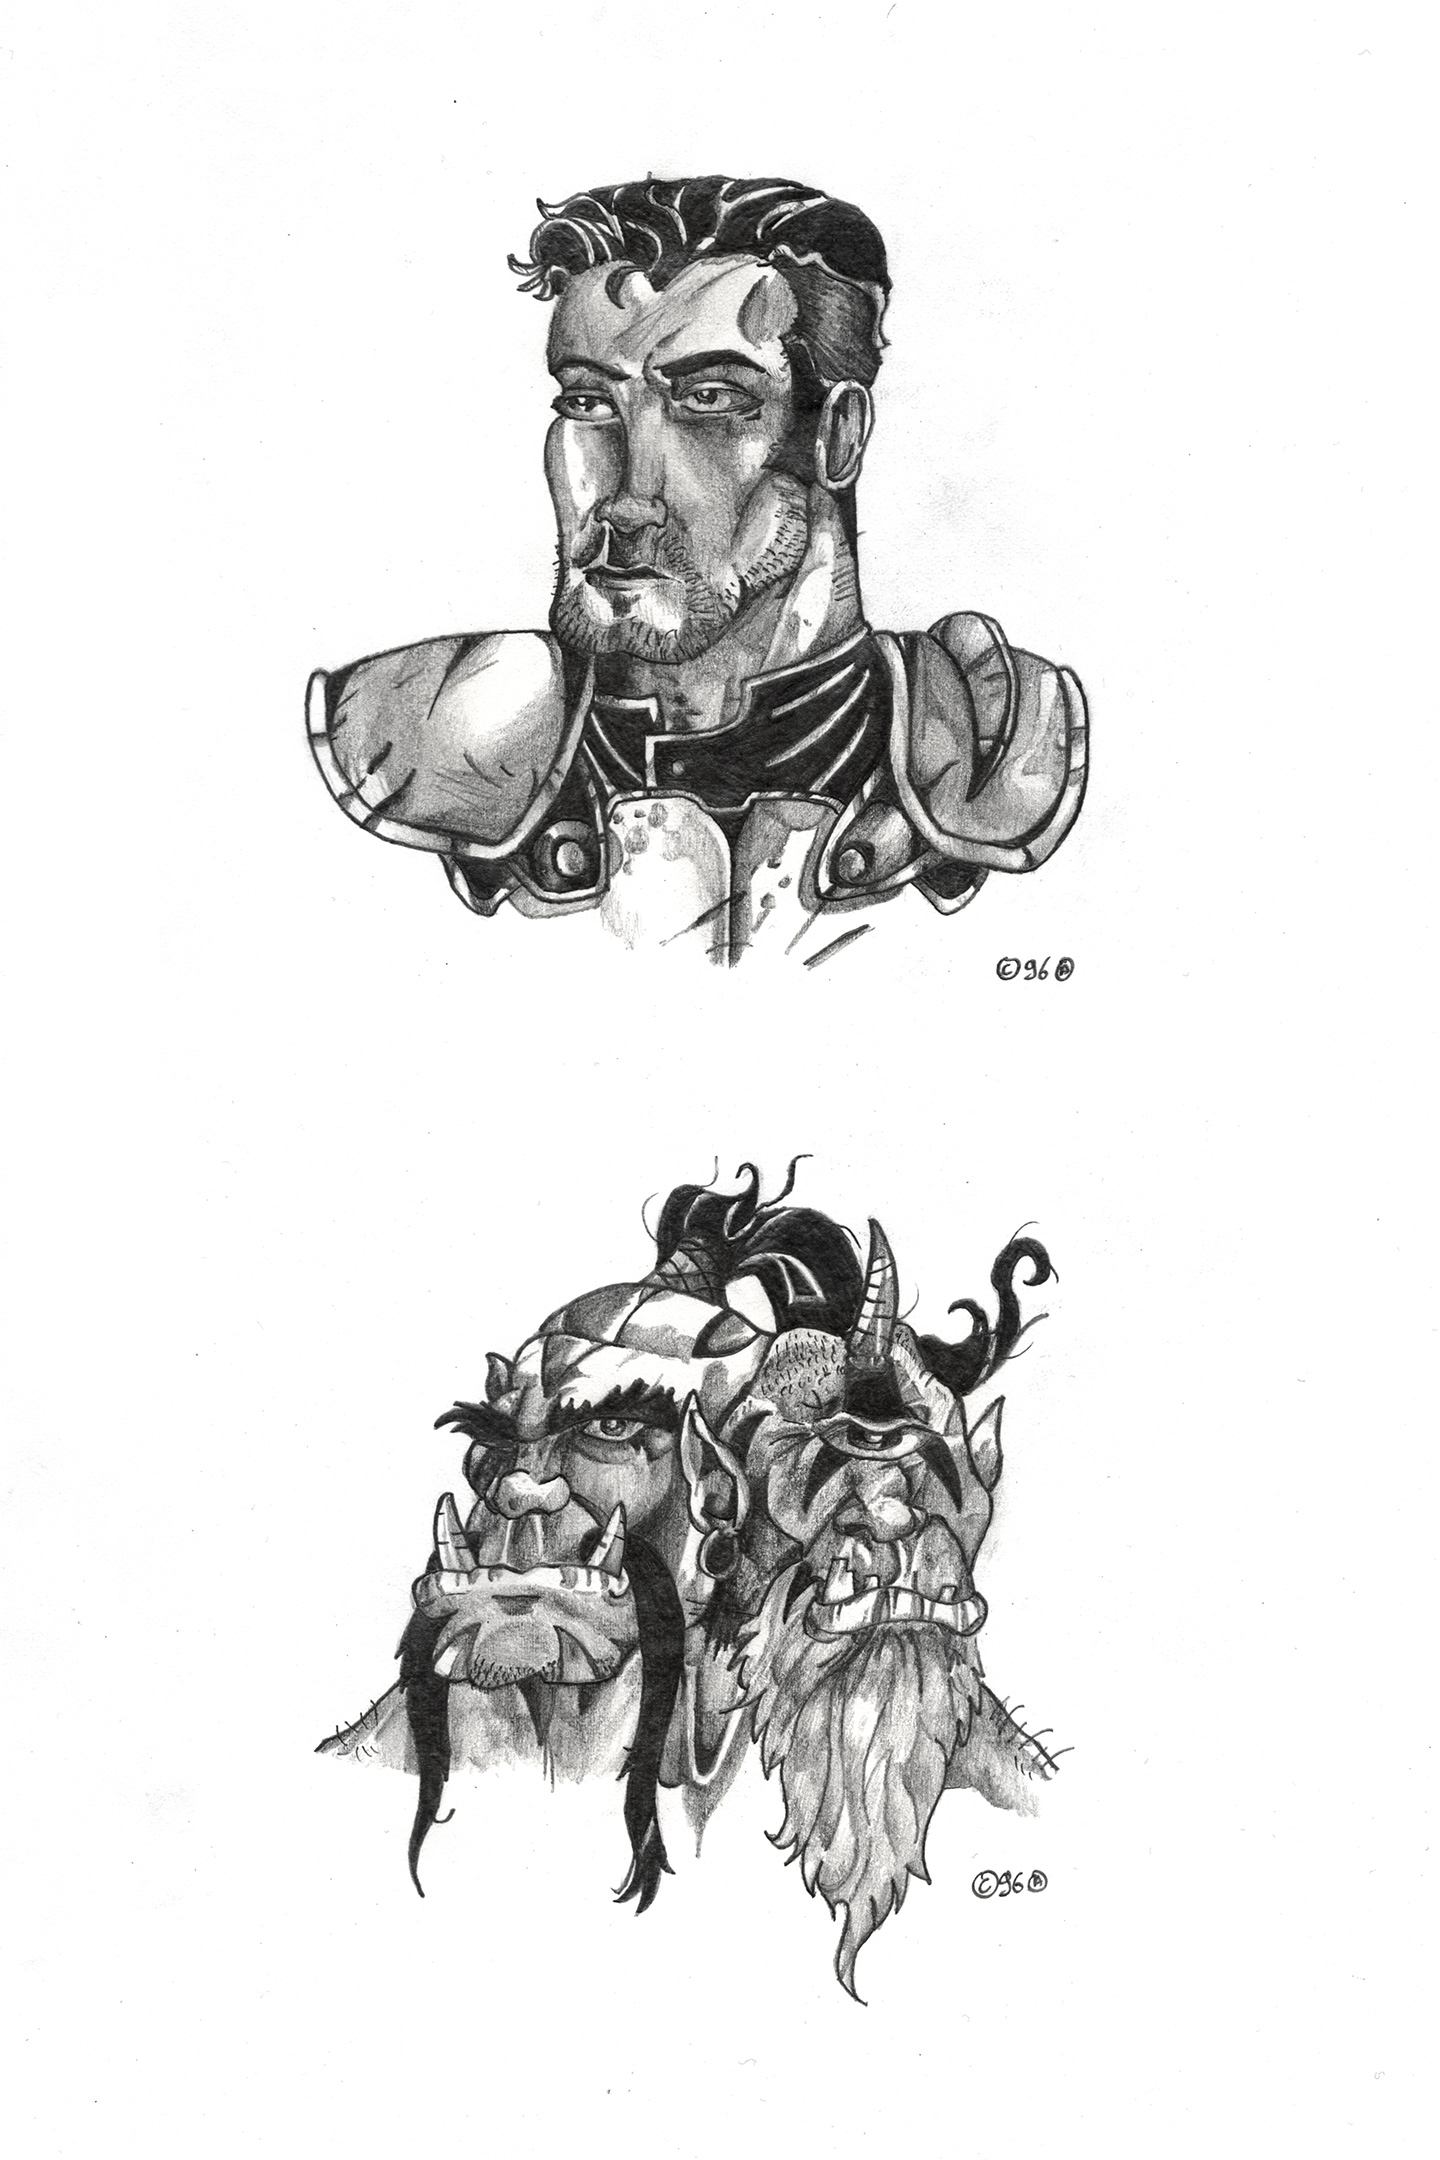 A drawing picturing heads from Warcraft II characters